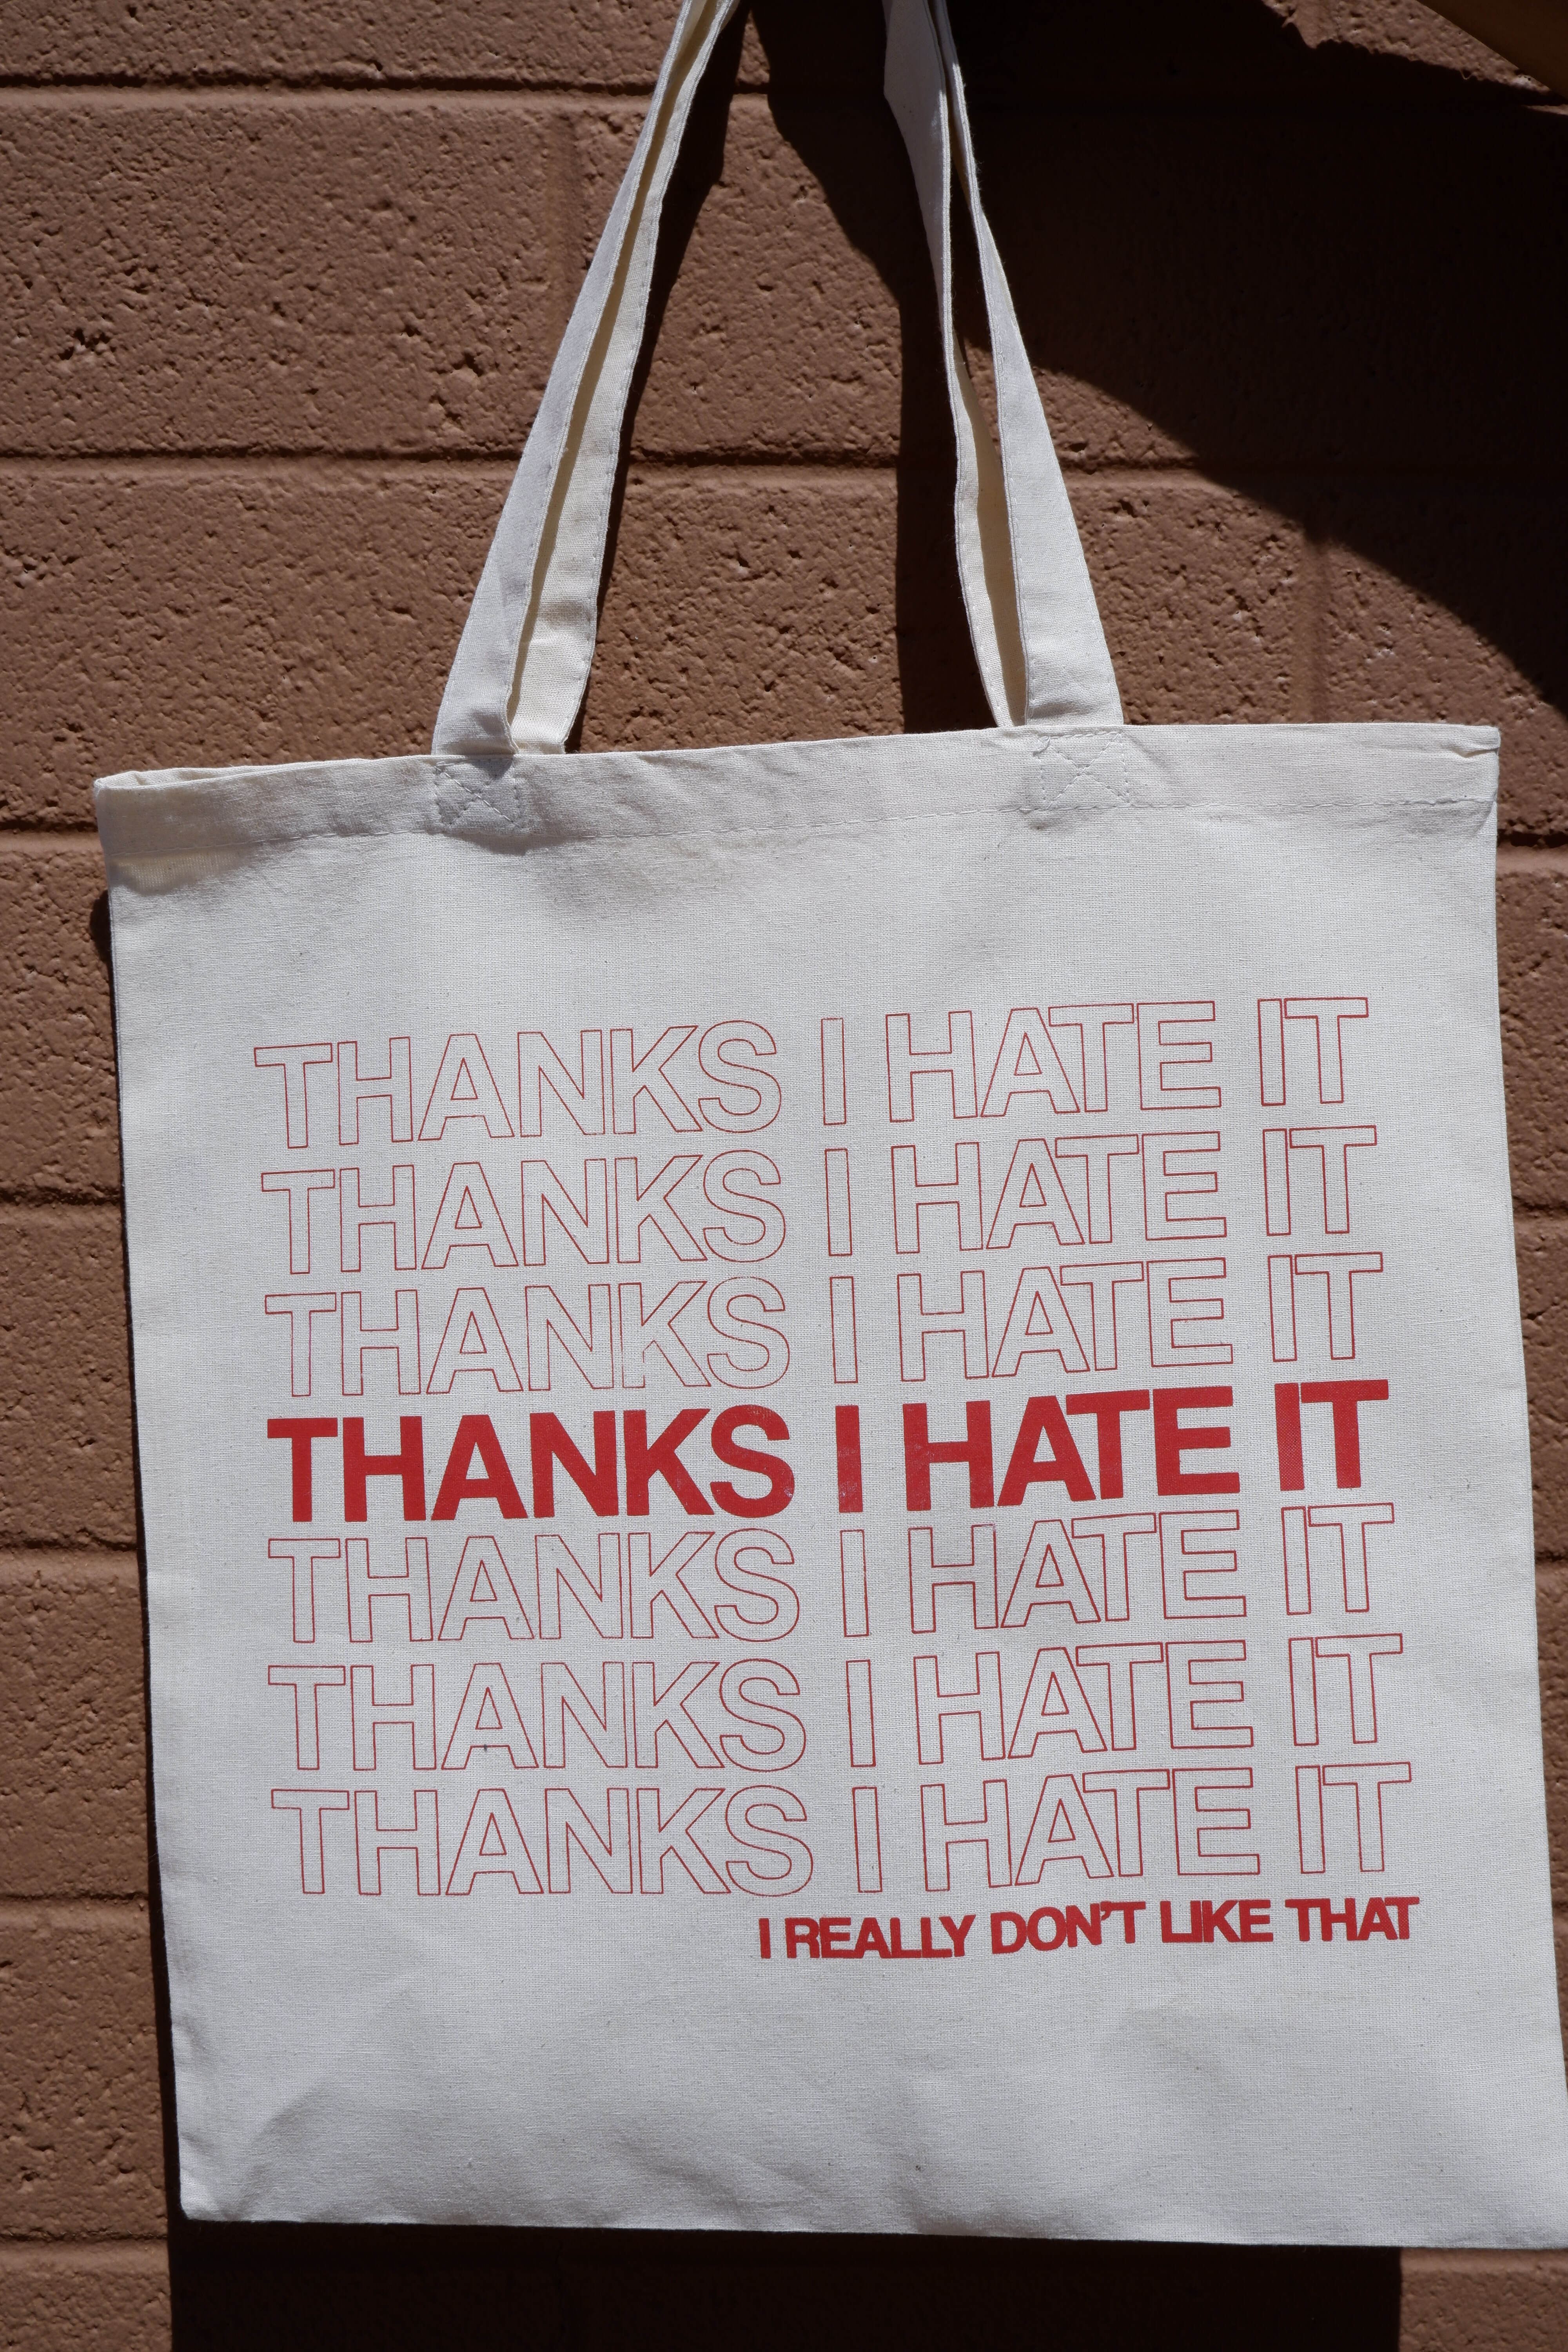 Thanks I Hate It Canvas Tote